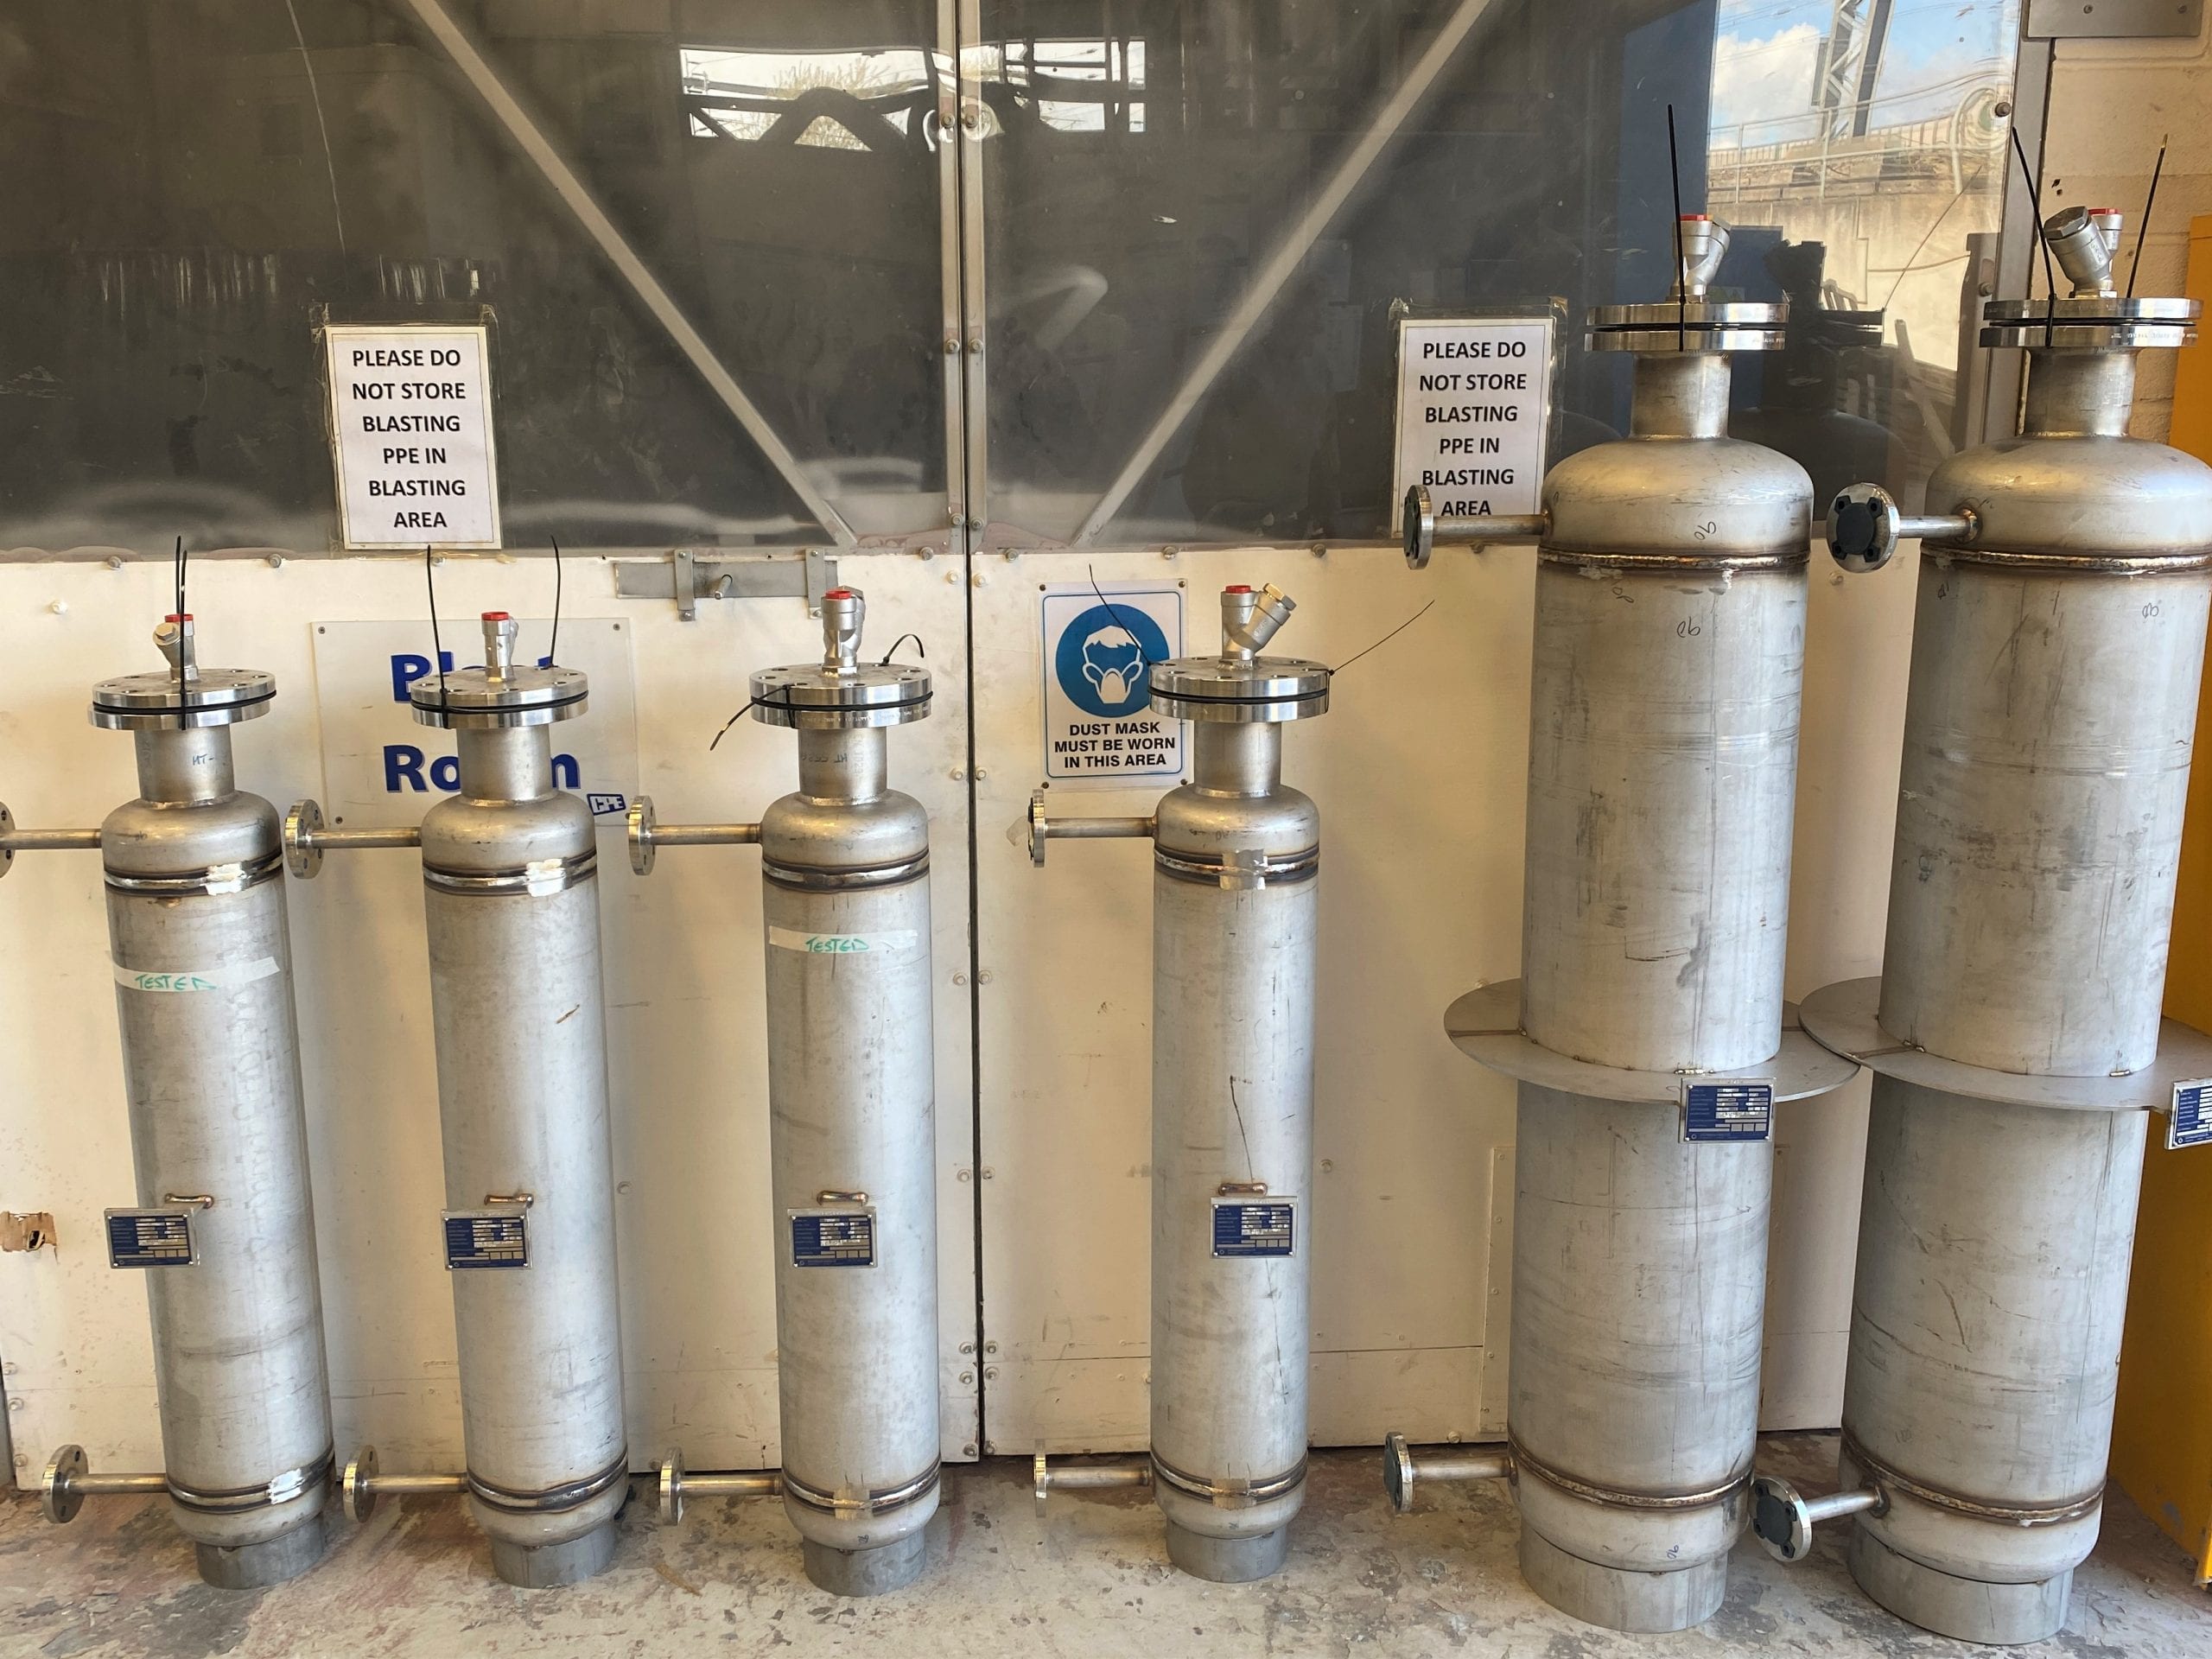 Pressure Vessels for the UK Water industry made from Stainless Steel